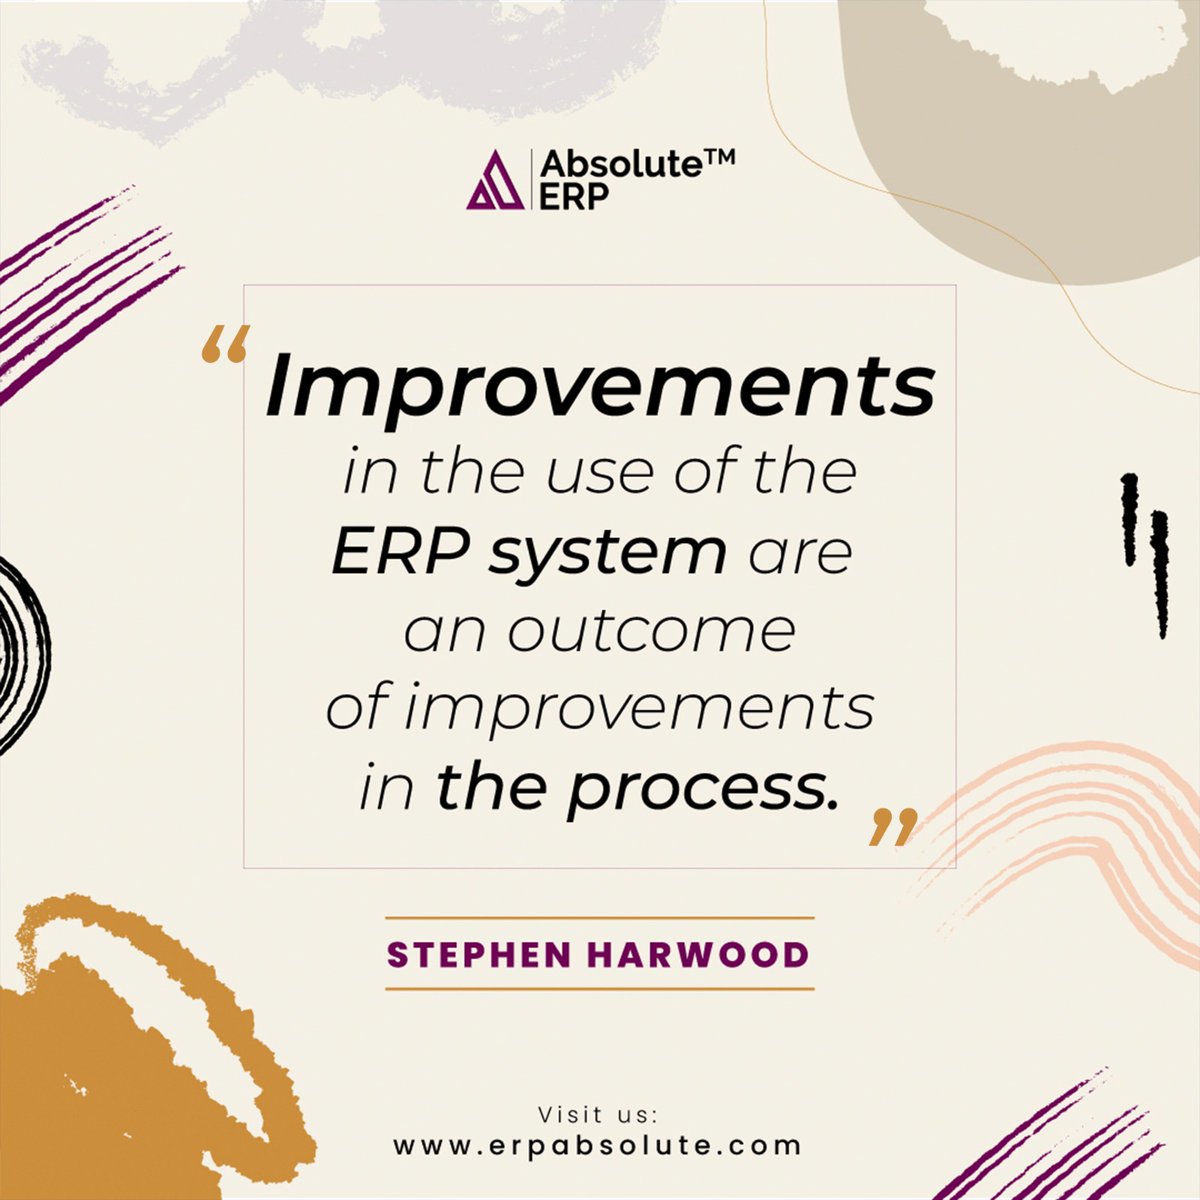 Unlock process excellence and elevate your business with seamless ERP enhancements. Learn more- shorturl.at/lxZ34

#erpsystem #absoluteerp #erp #erpsolution #manufacturingerpsoftware #business #erpenhancements #erpsoftware #manufacturingerp #ERPsolutionprovider